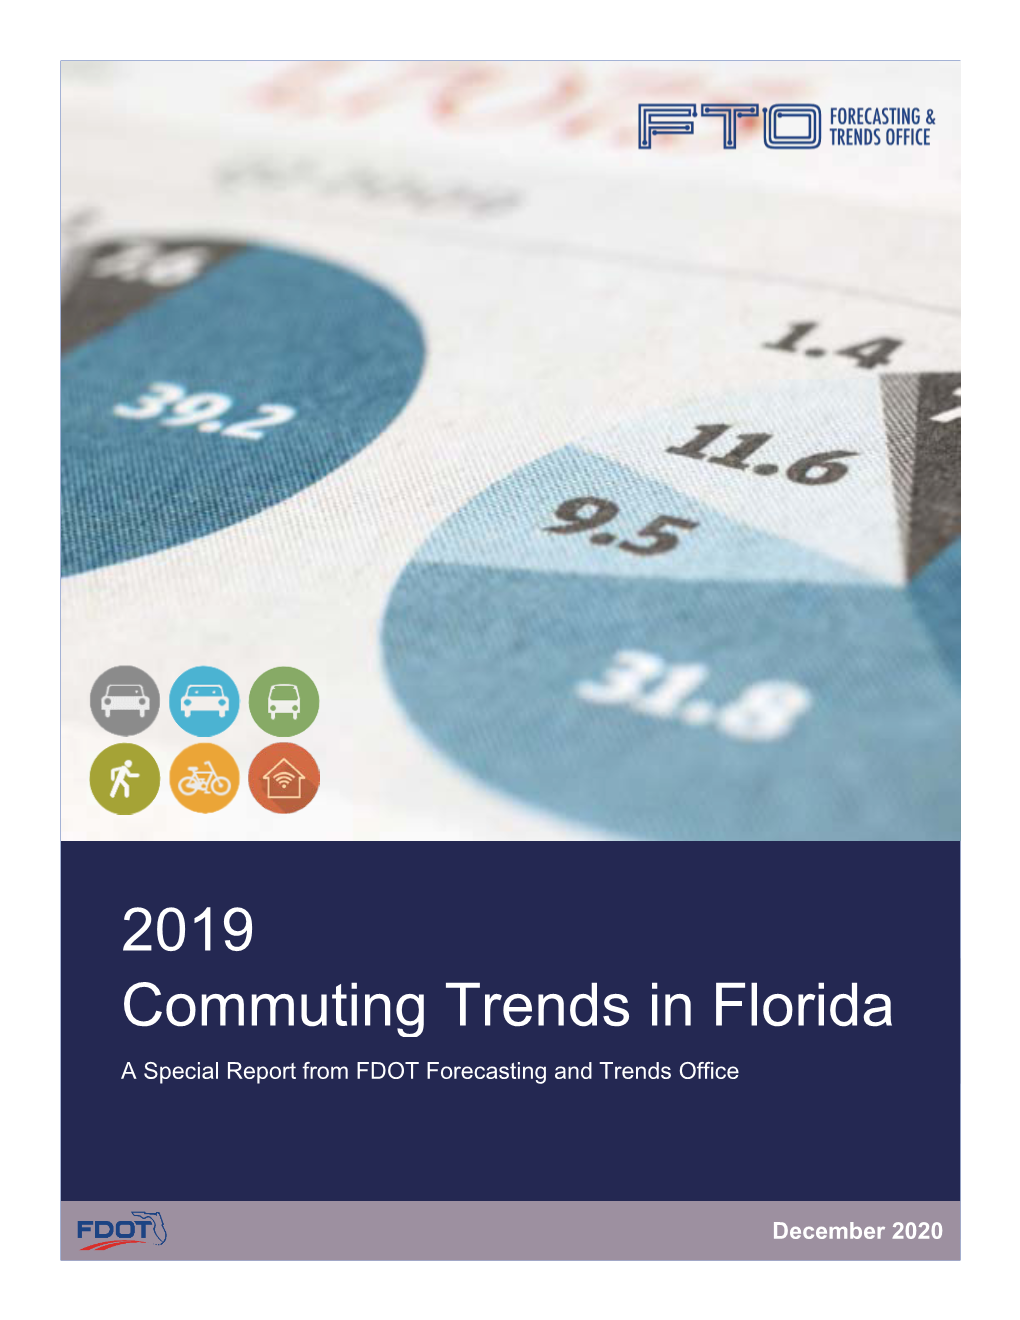 2019 Commuting Trends in Florida a Special Report from FDOT Forecasting and Trends Office